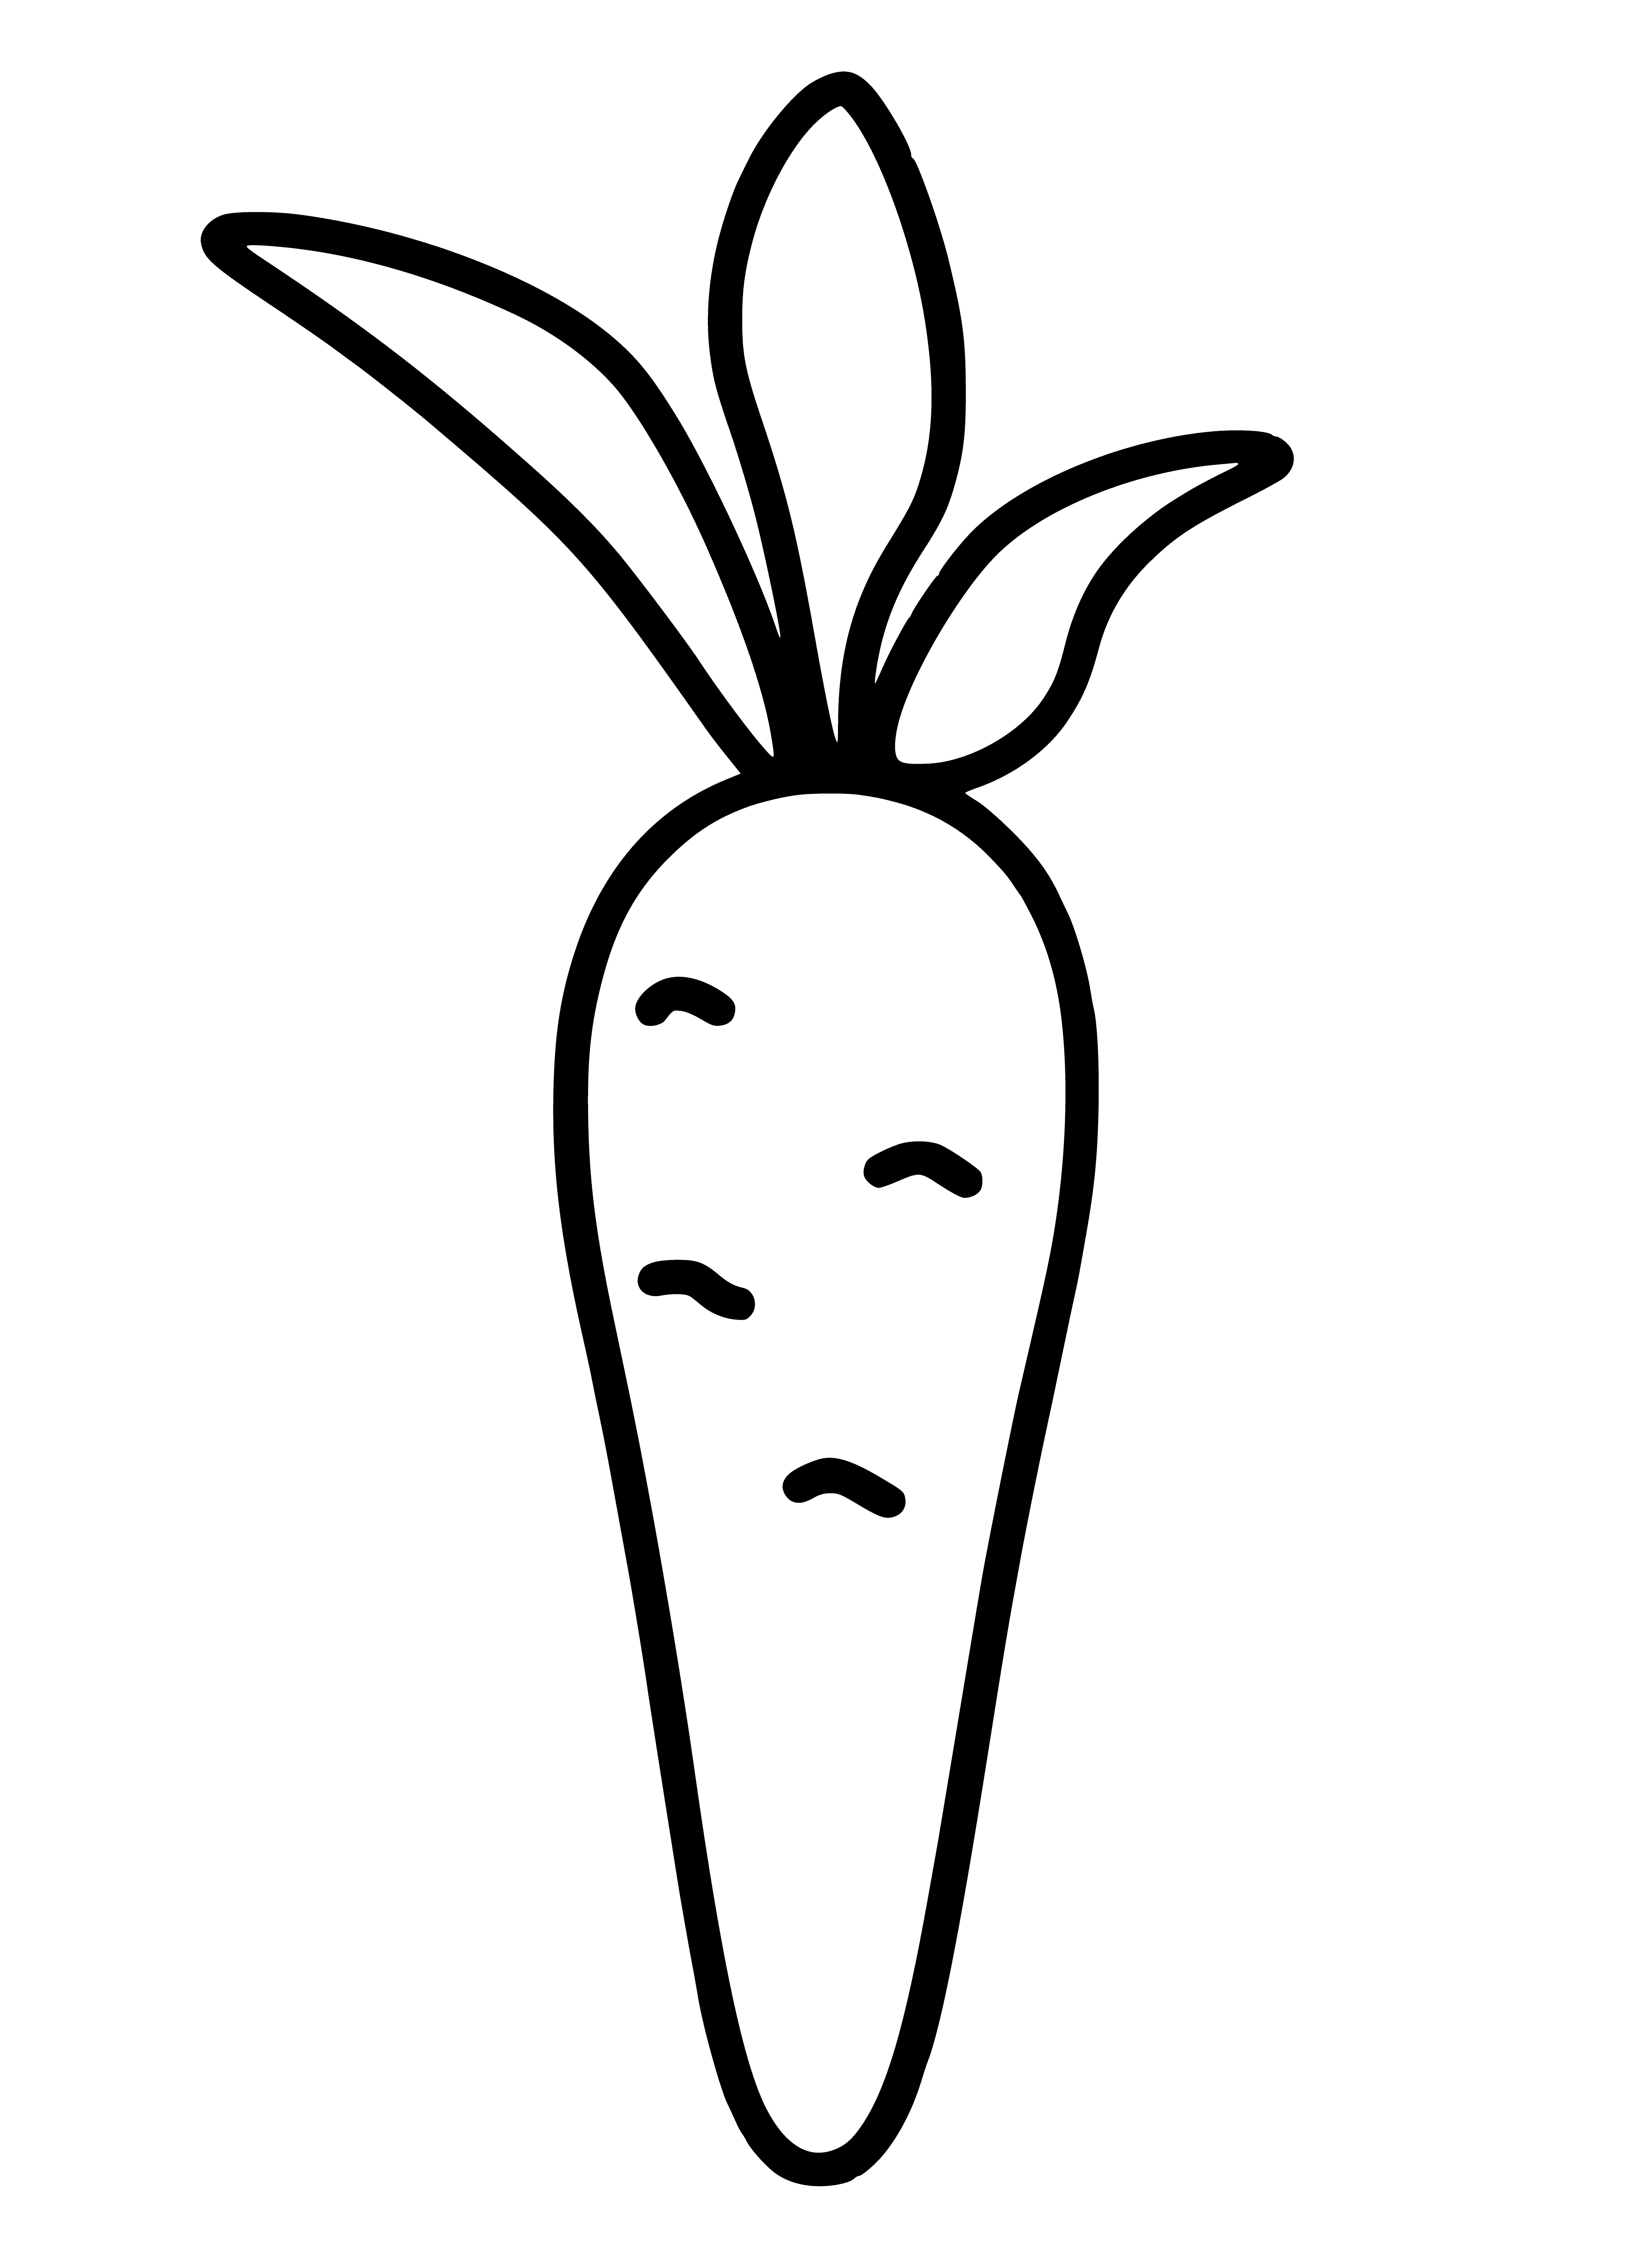 coloring page: A carrot character looks happily at themselves in a hand mirror wearing an orange and white striped shirt. A blue and white polka dotted curtain serves as a backdrop.